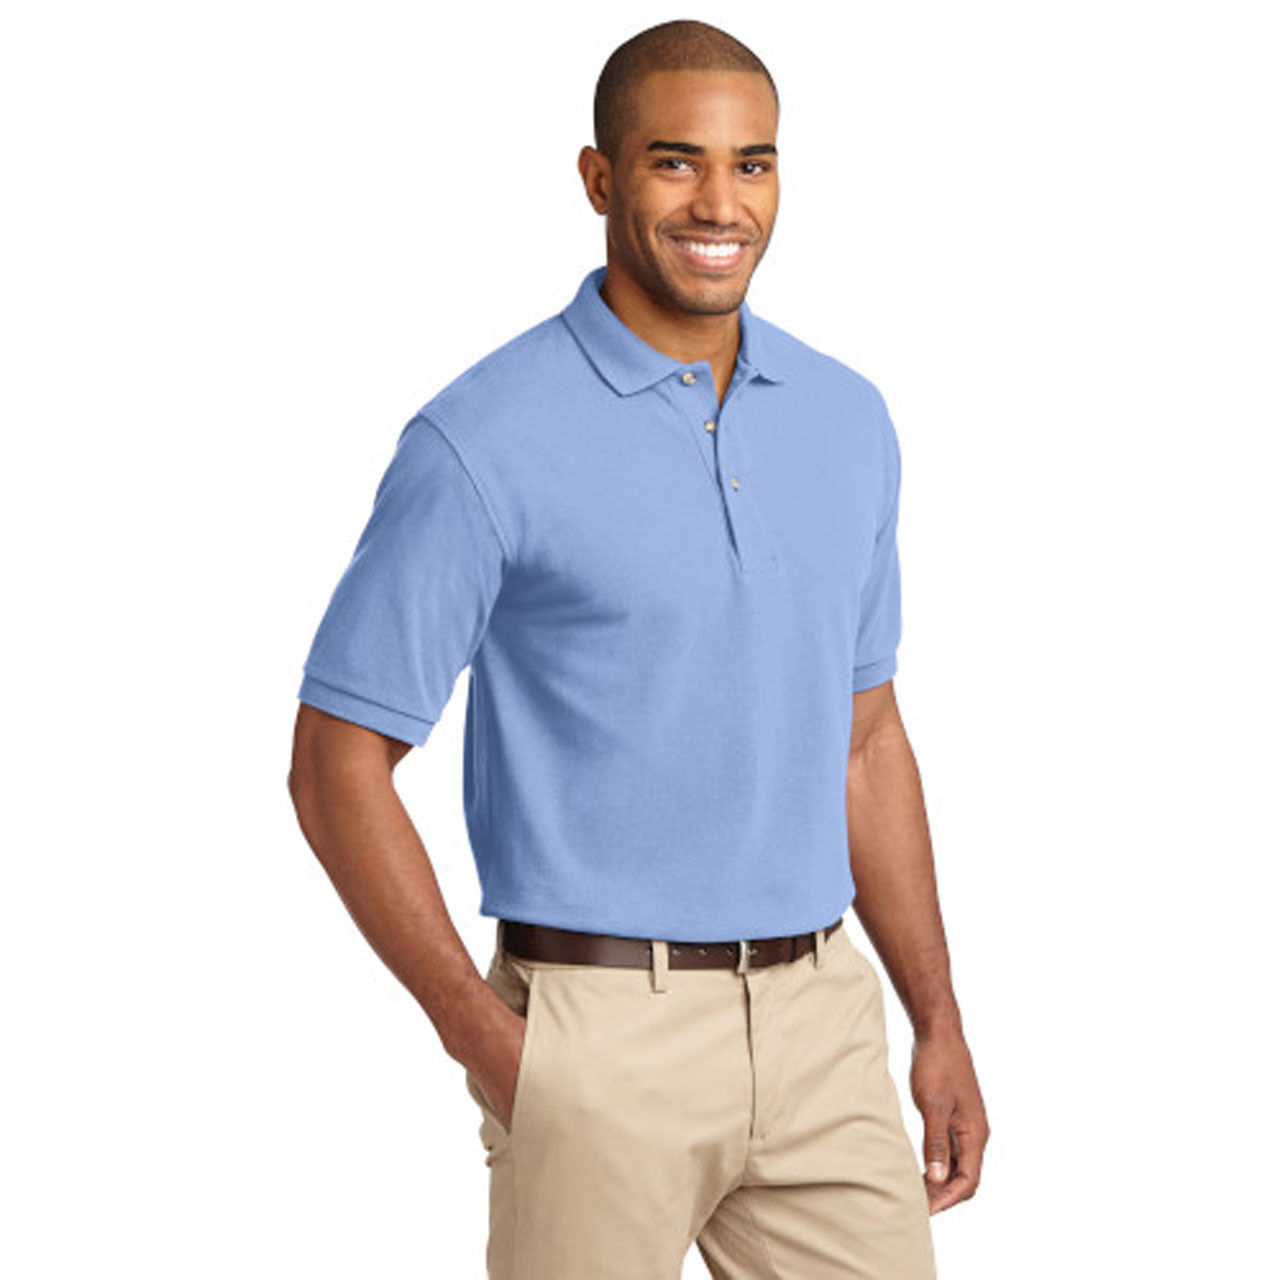 Does the men's blue polo and khaki pants have a comfortable feel?